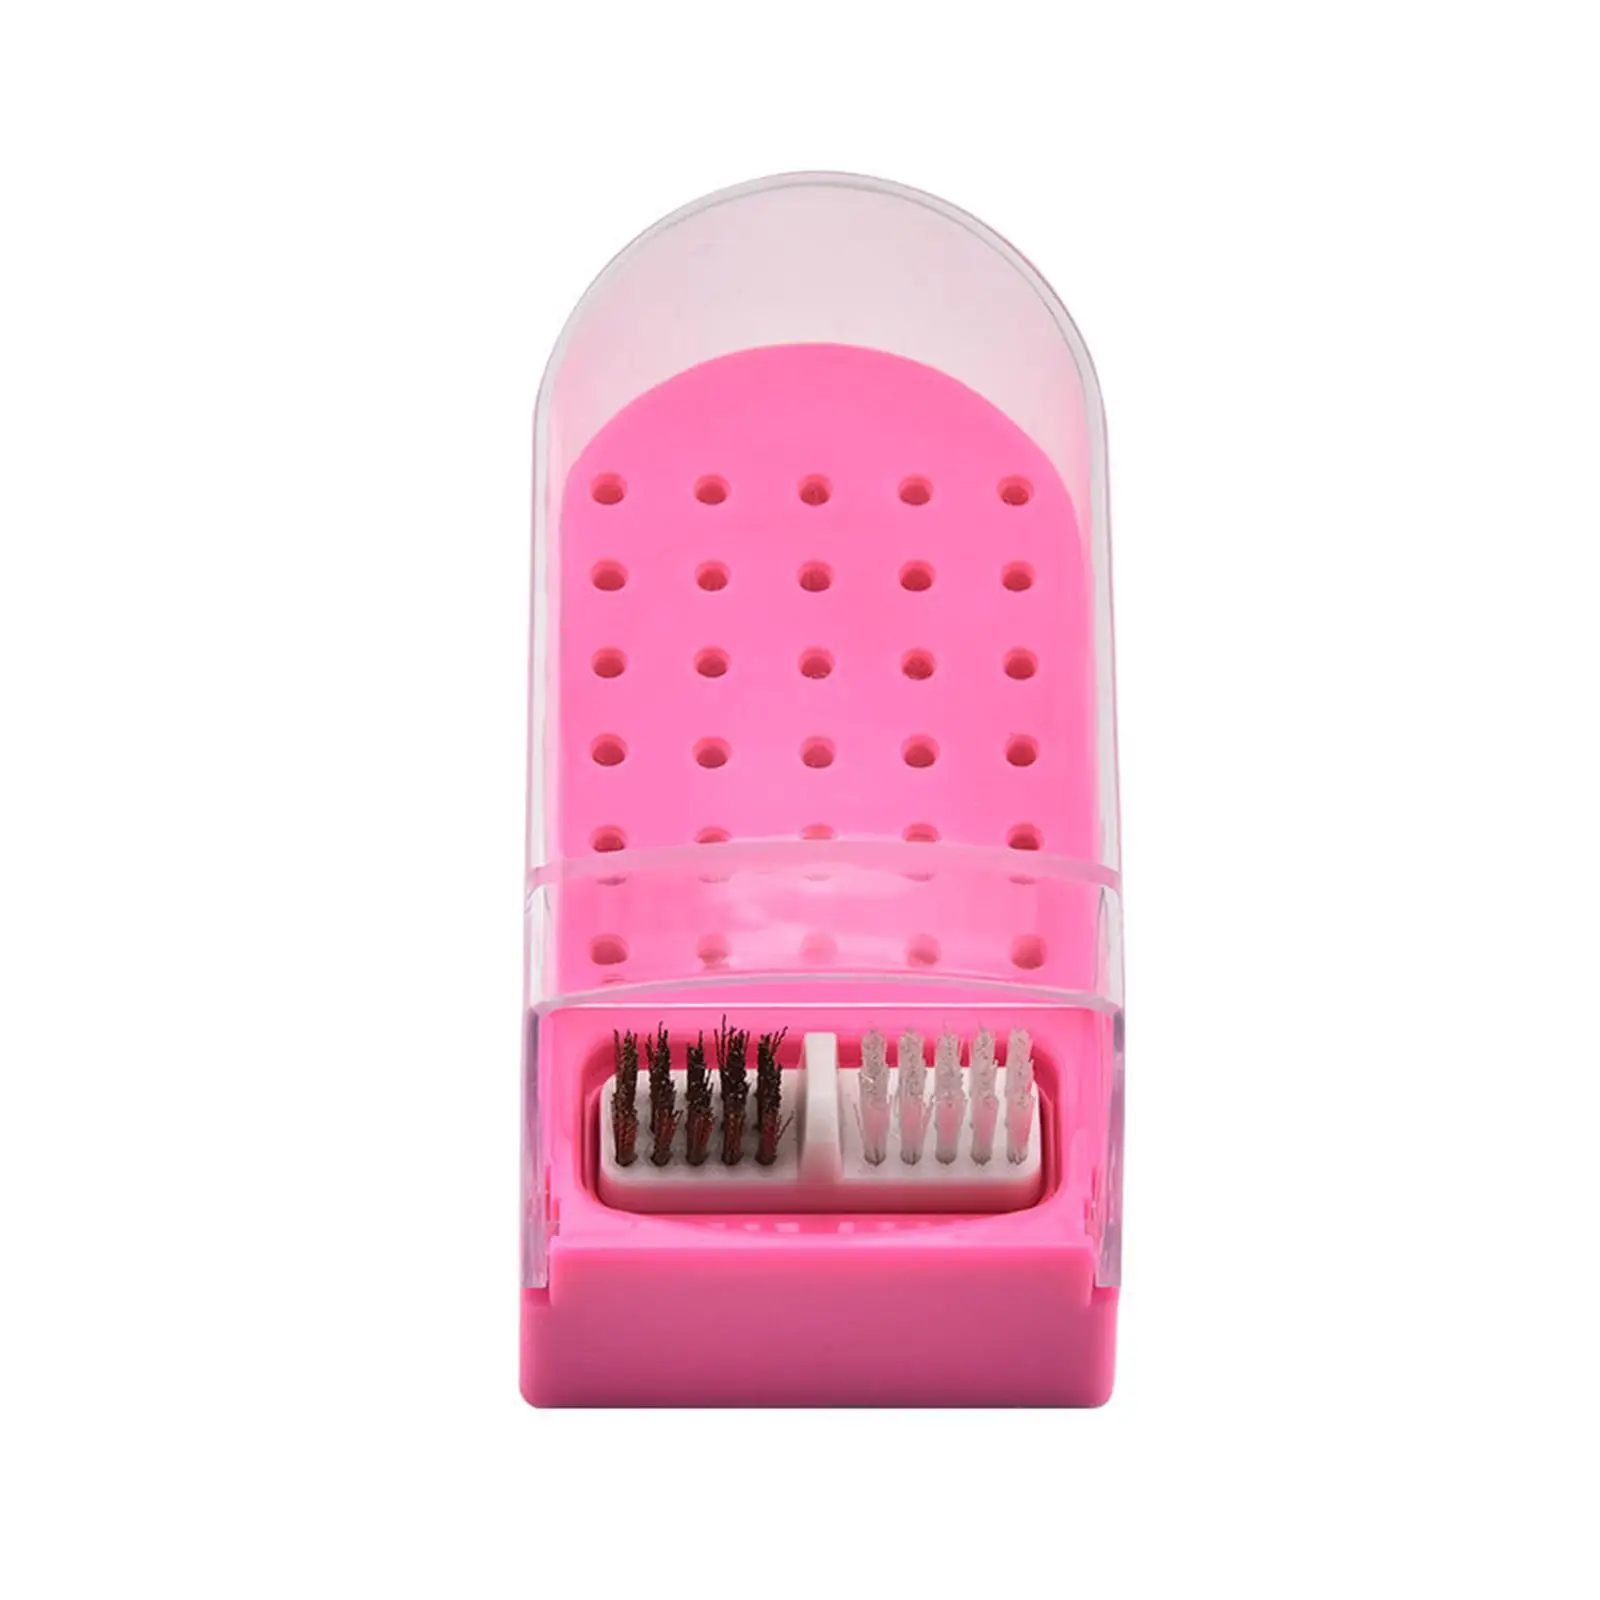 Nail Drill Bit Holder Salon Display Stand Home DIY with Clear Lid Dustproof Polishing Bits Storage 30 Slots Container Case